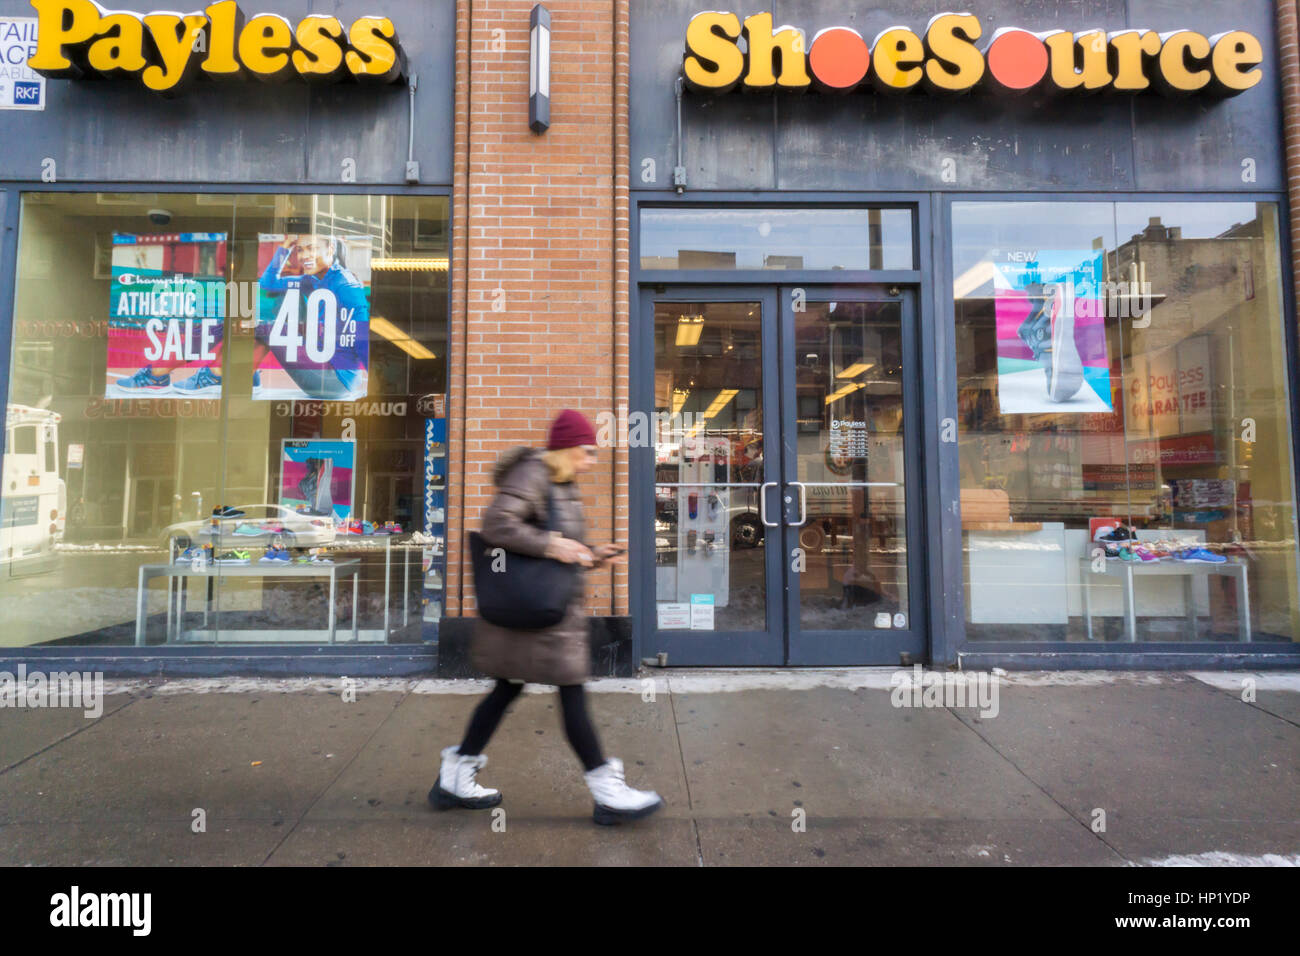 A Payless ShoeSource store in New York on Friday, February 10, 2017. Payless is reported to be in talks with lenders about a restructuring plan which may include closing up to 1000 stores or a possible bankruptcy. (© Richard B. Levine) Stock Photo